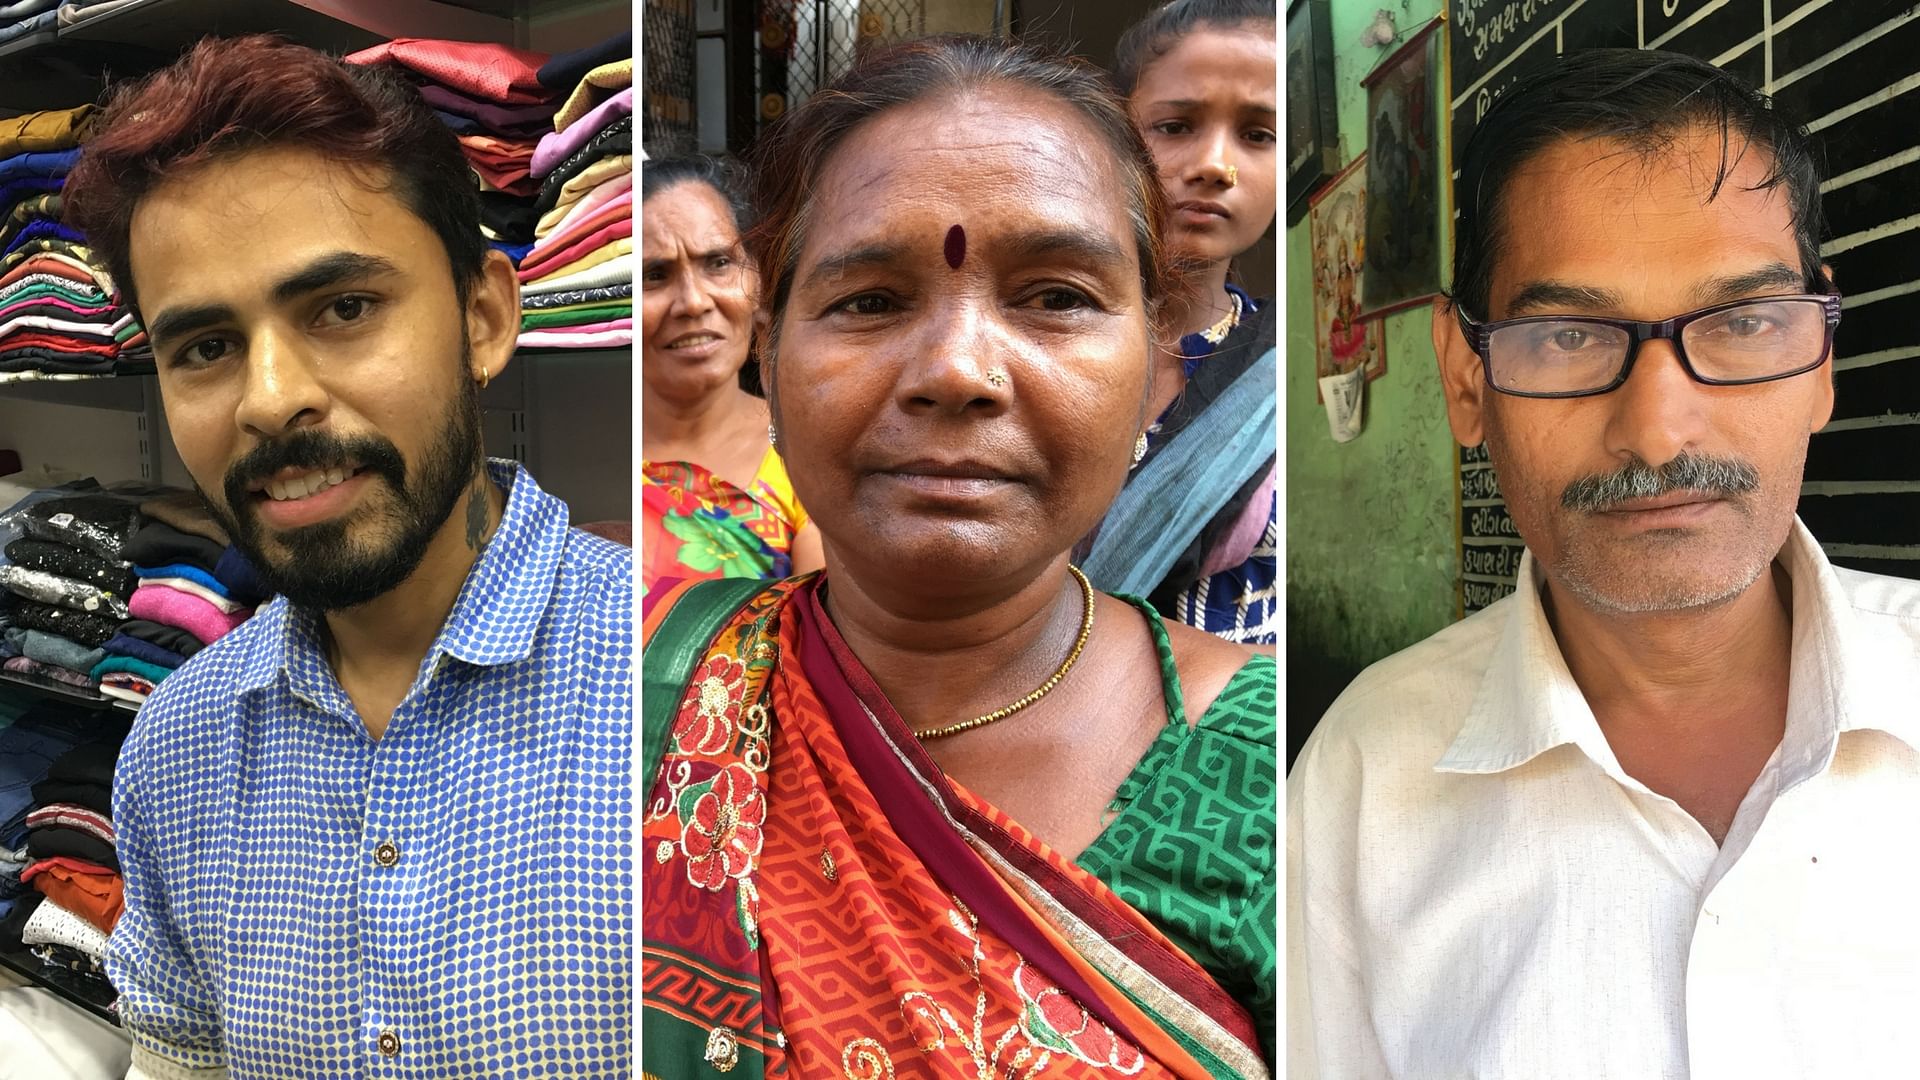 From Rohingya Muslims to health, watch these five people talk about what will define their vote this election.